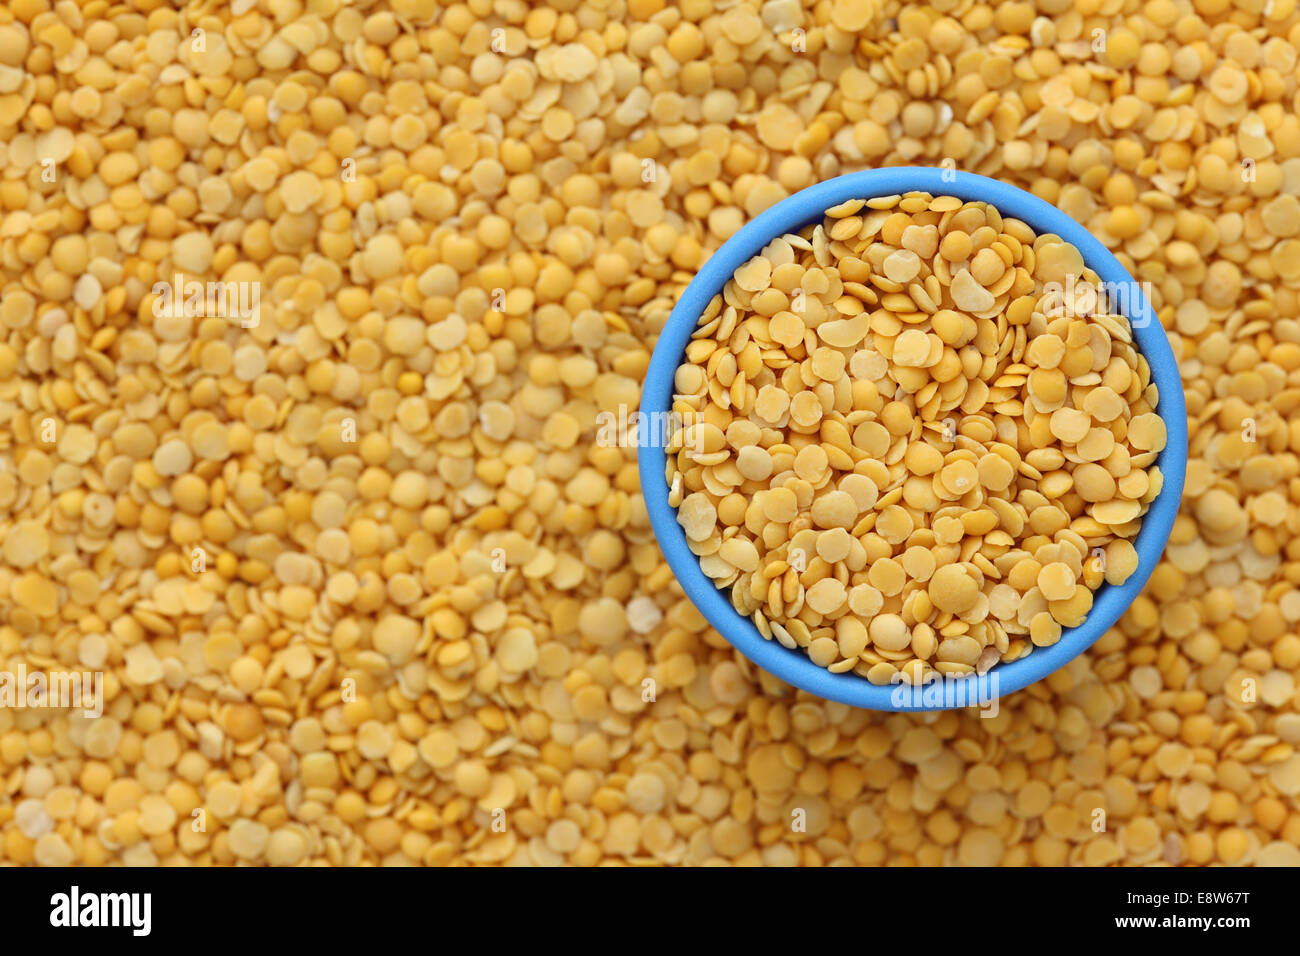 Yellow split lentils in a blue bowl on lentil background. Close-up. Stock Photo